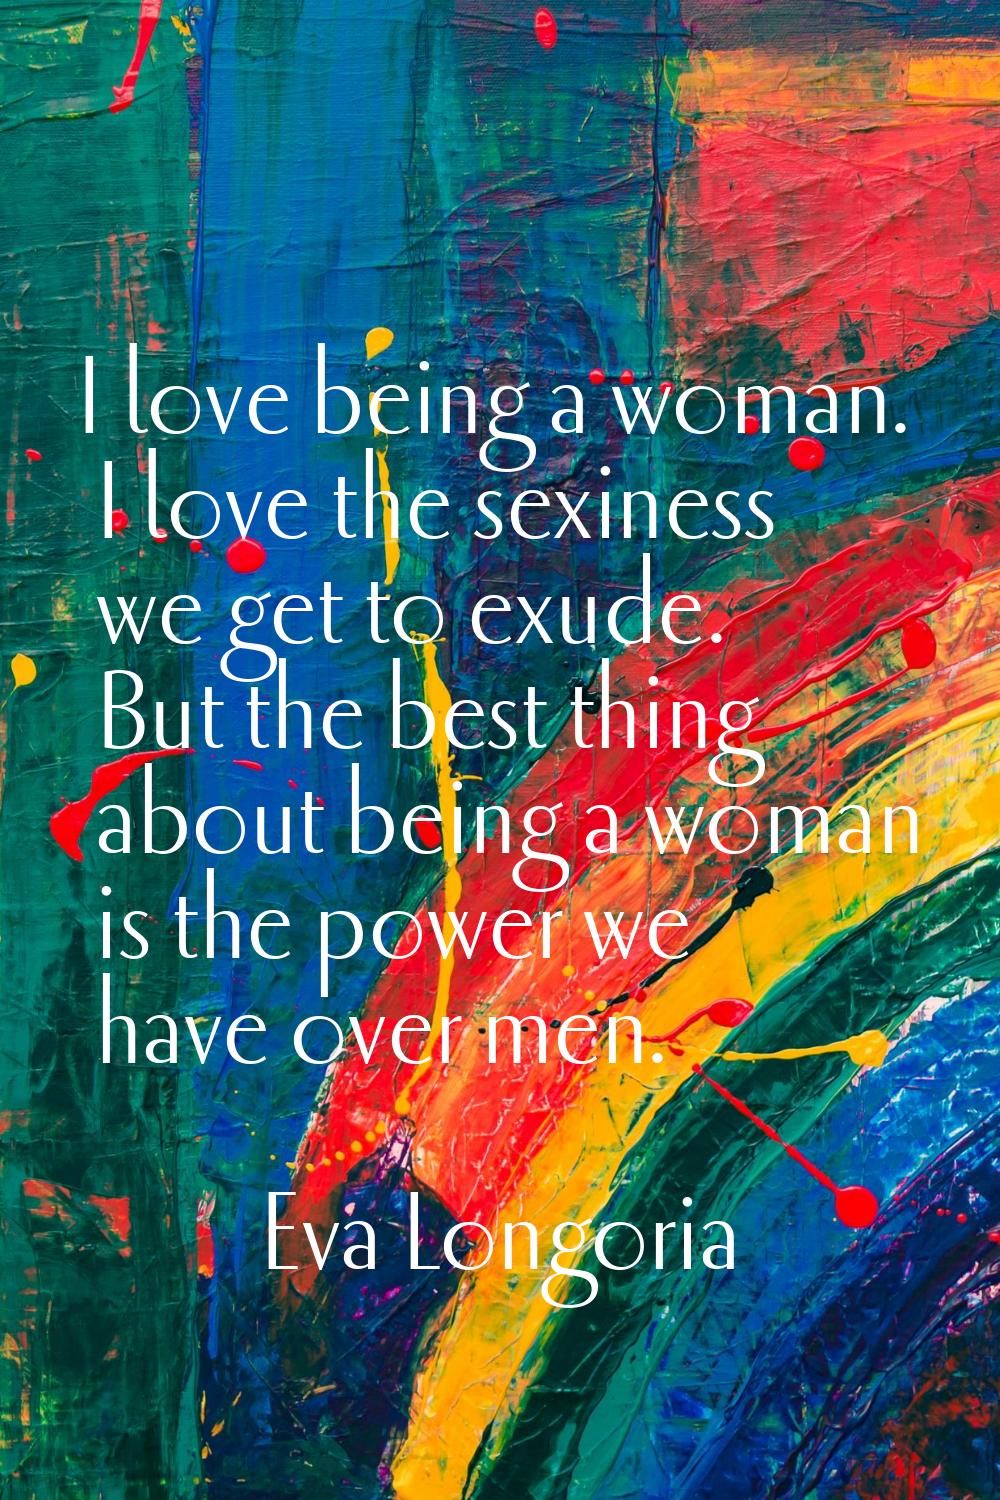 I love being a woman. I love the sexiness we get to exude. But the best thing about being a woman i